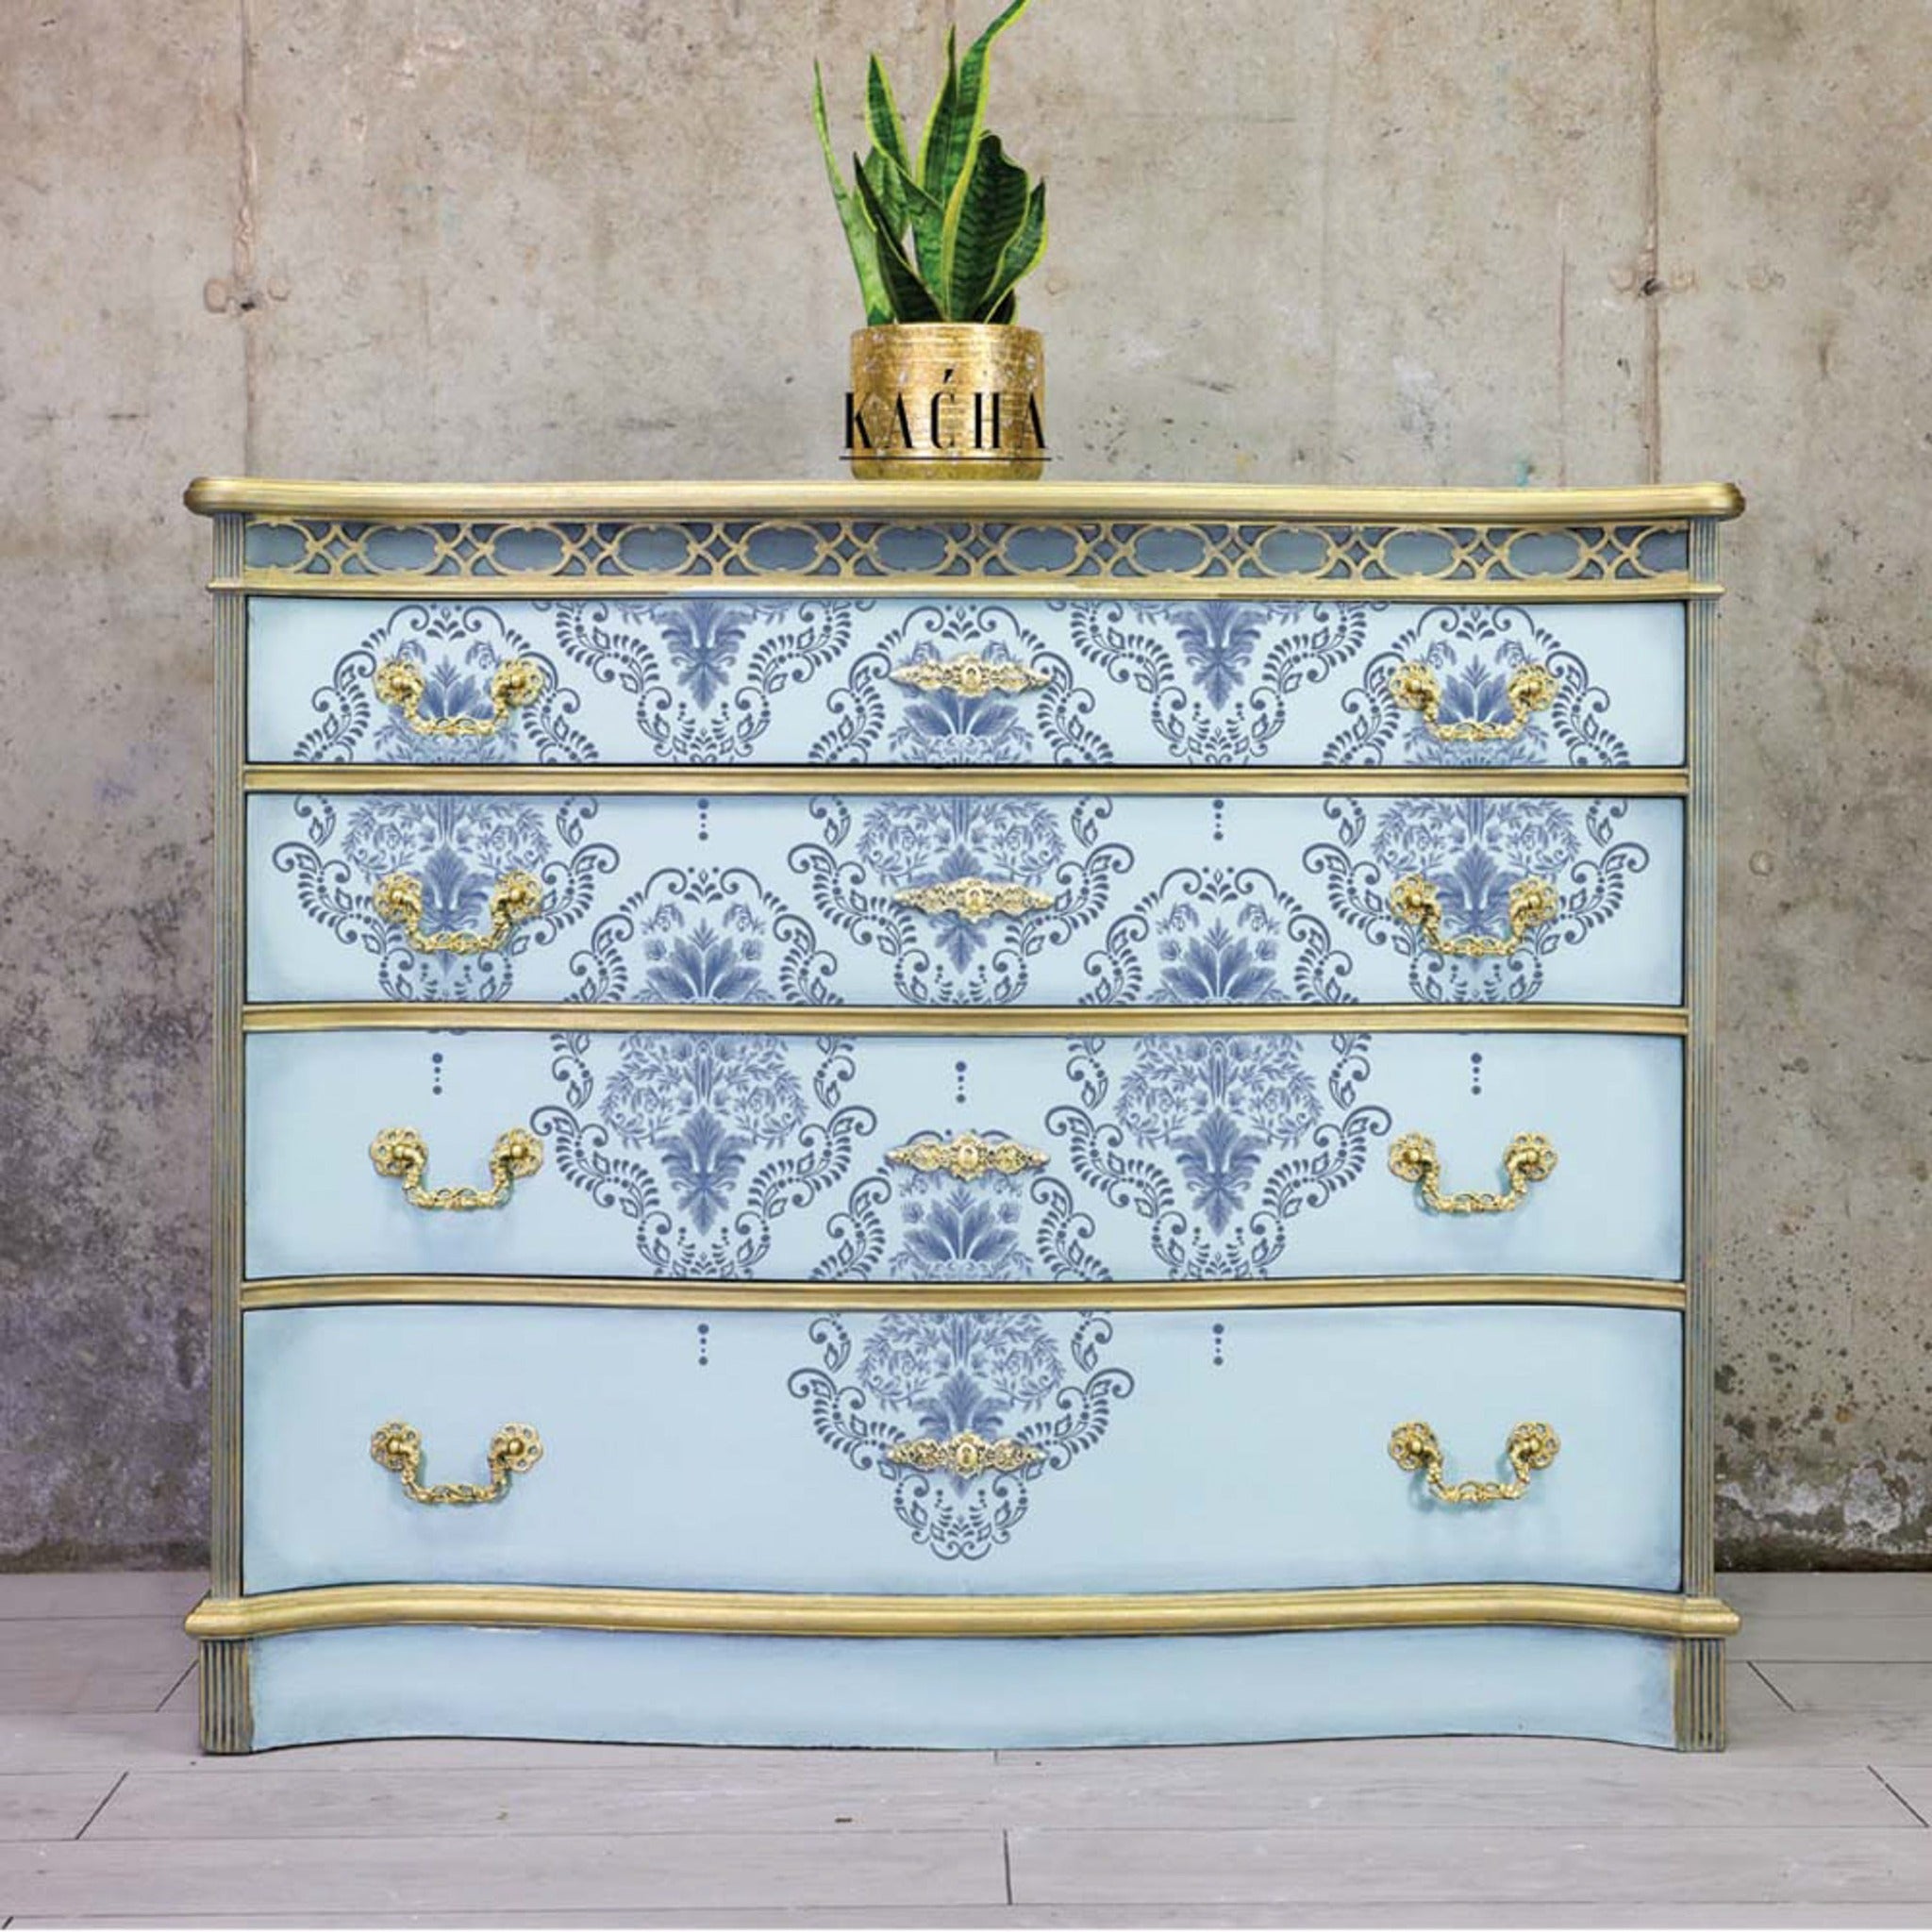 A 4-drawer dresser refurbished by Kacha is painted light blue with gold accents and features the Kacha Dana Damask transfer on it.